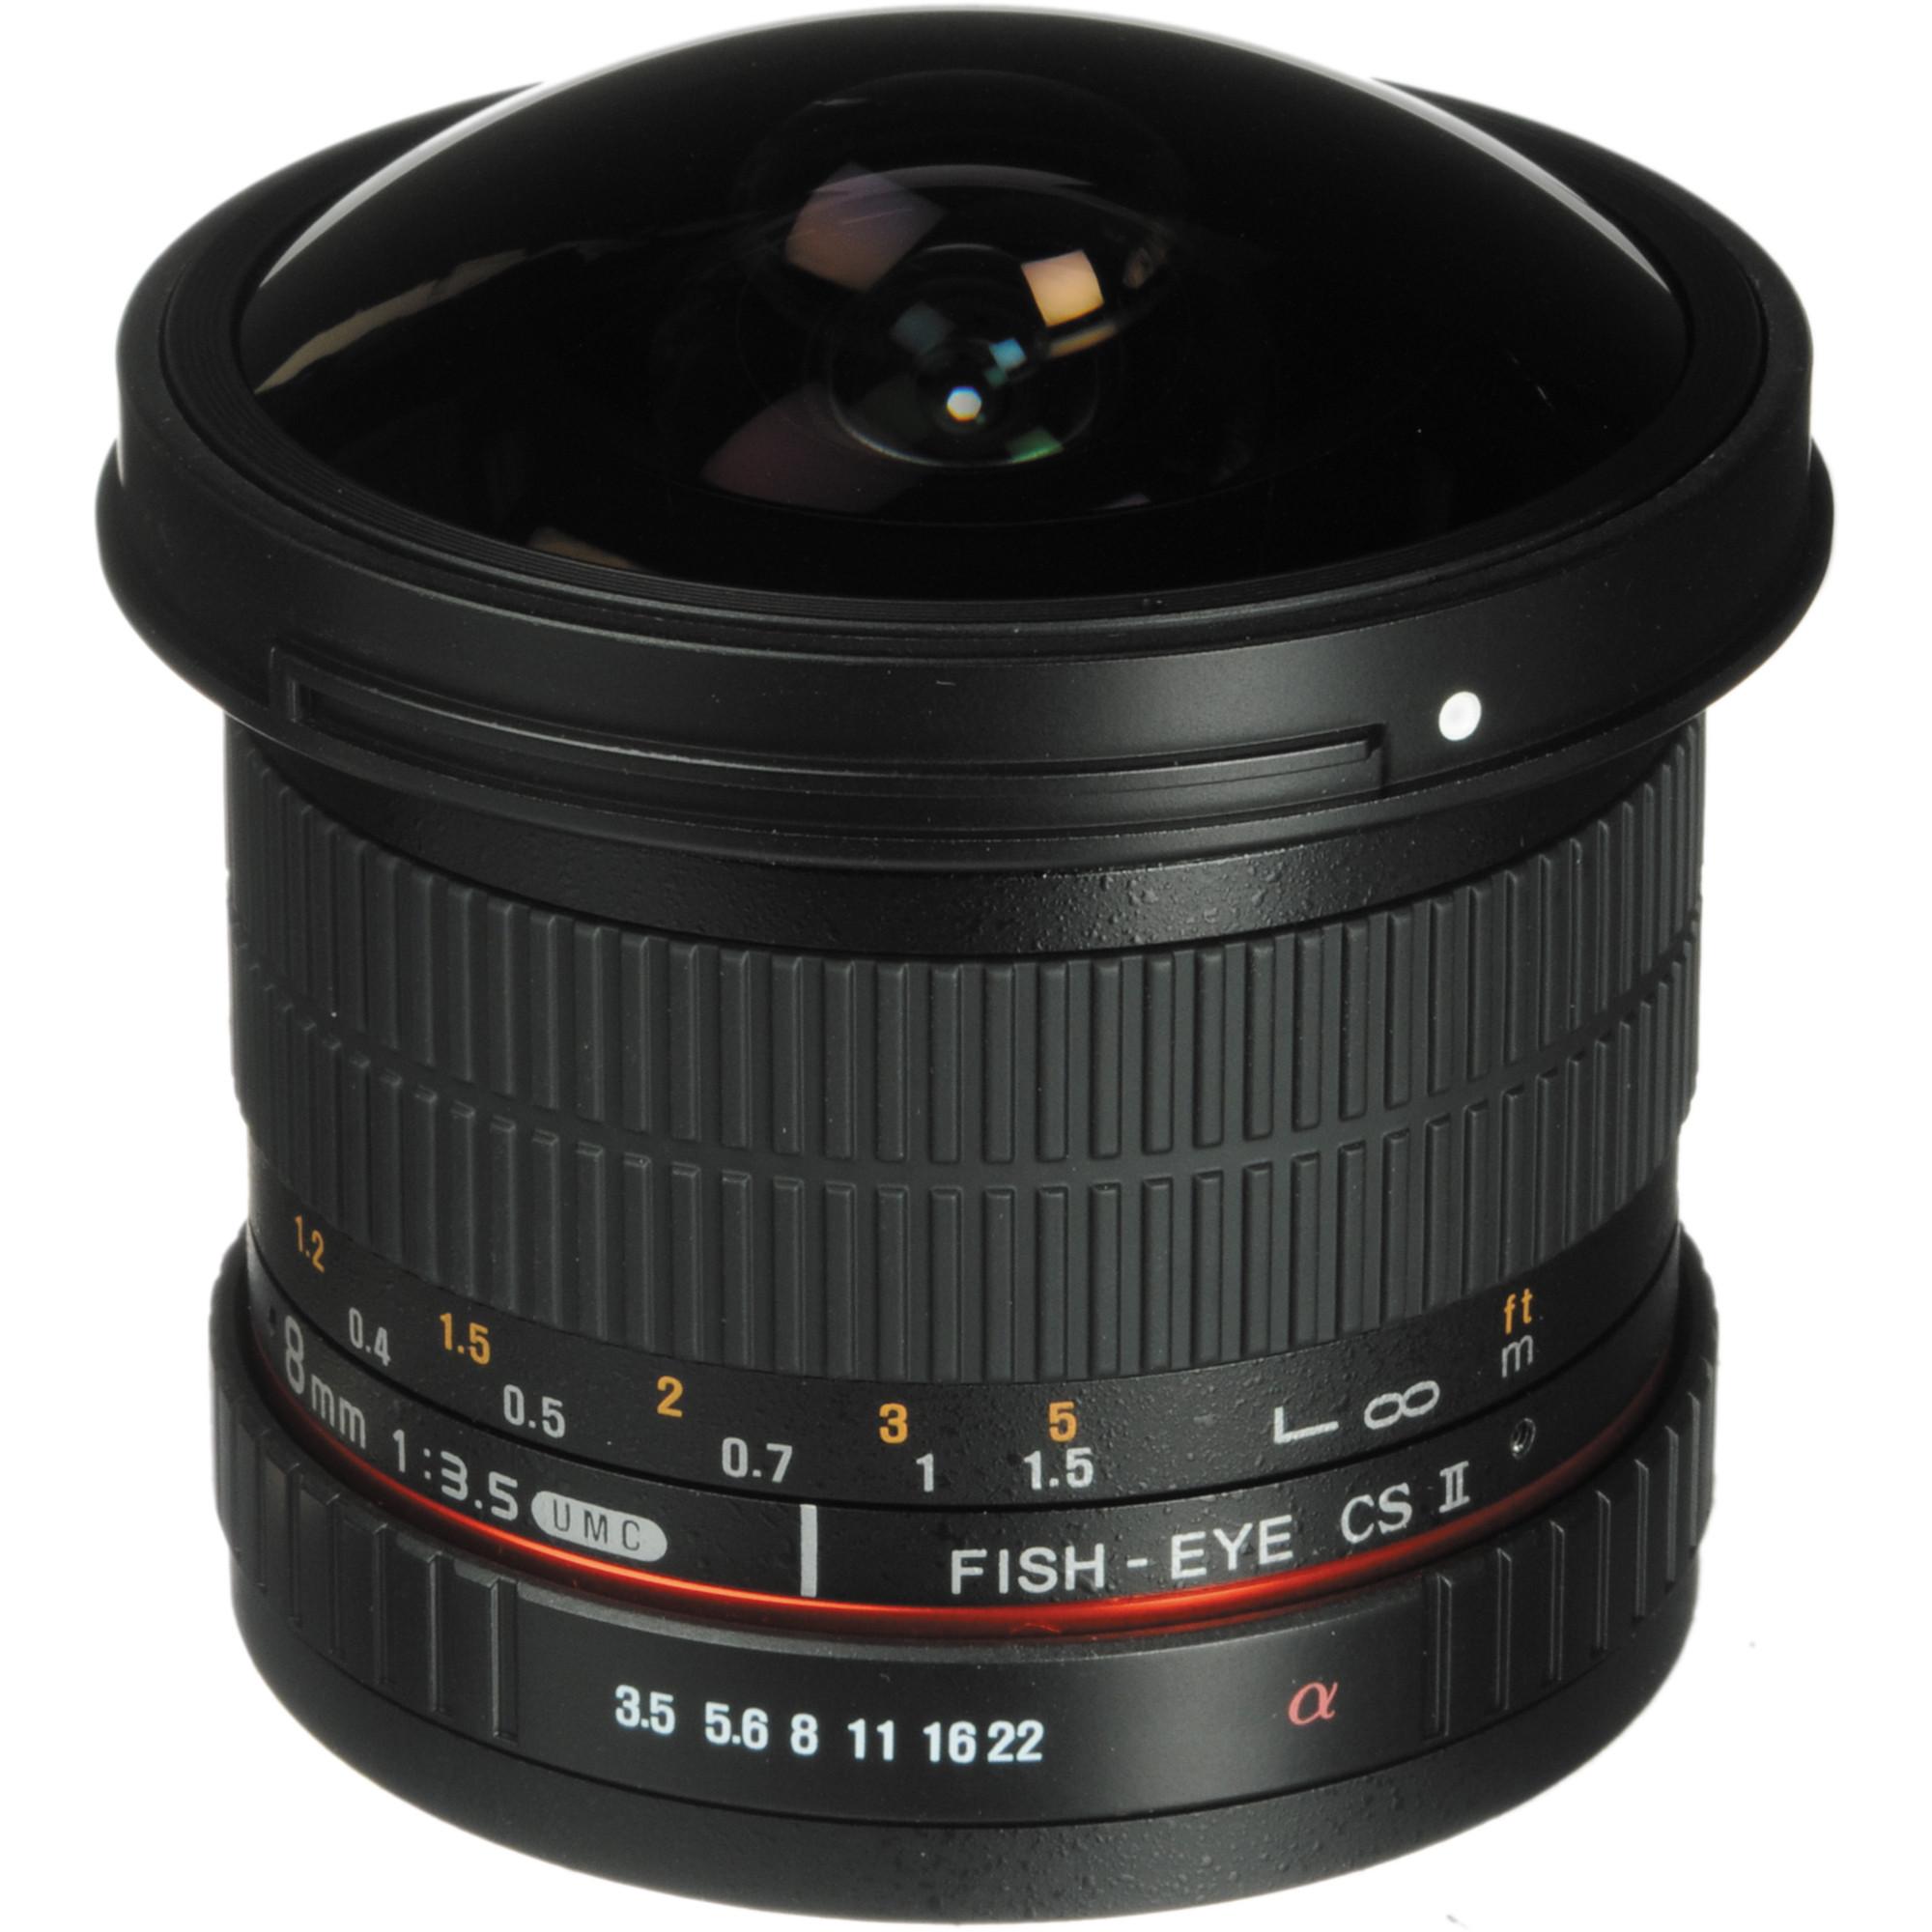 Rokinon 8mm f 3.5 HD Fisheye Lens with Removable Hood for Sony